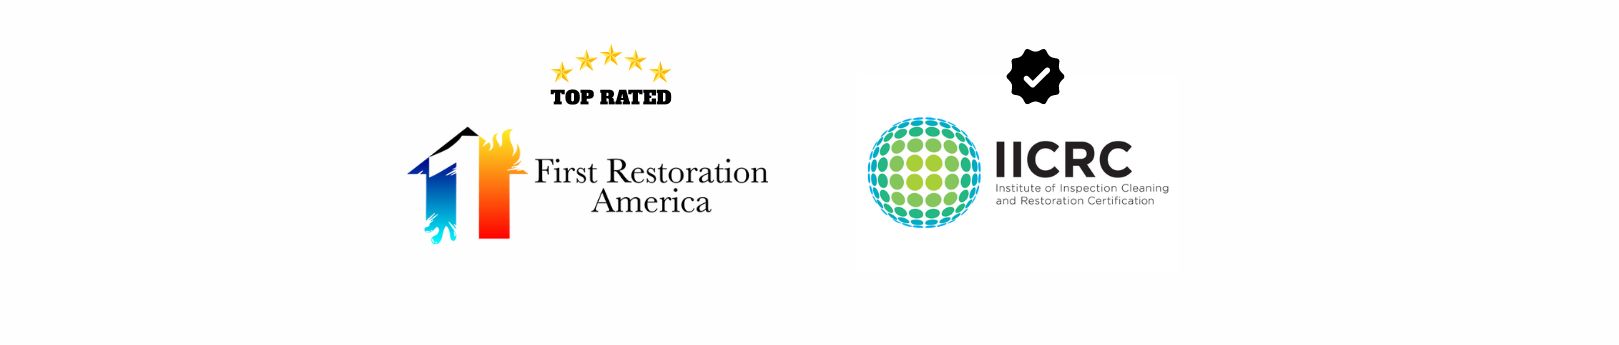 5-star rated disaster restoration service